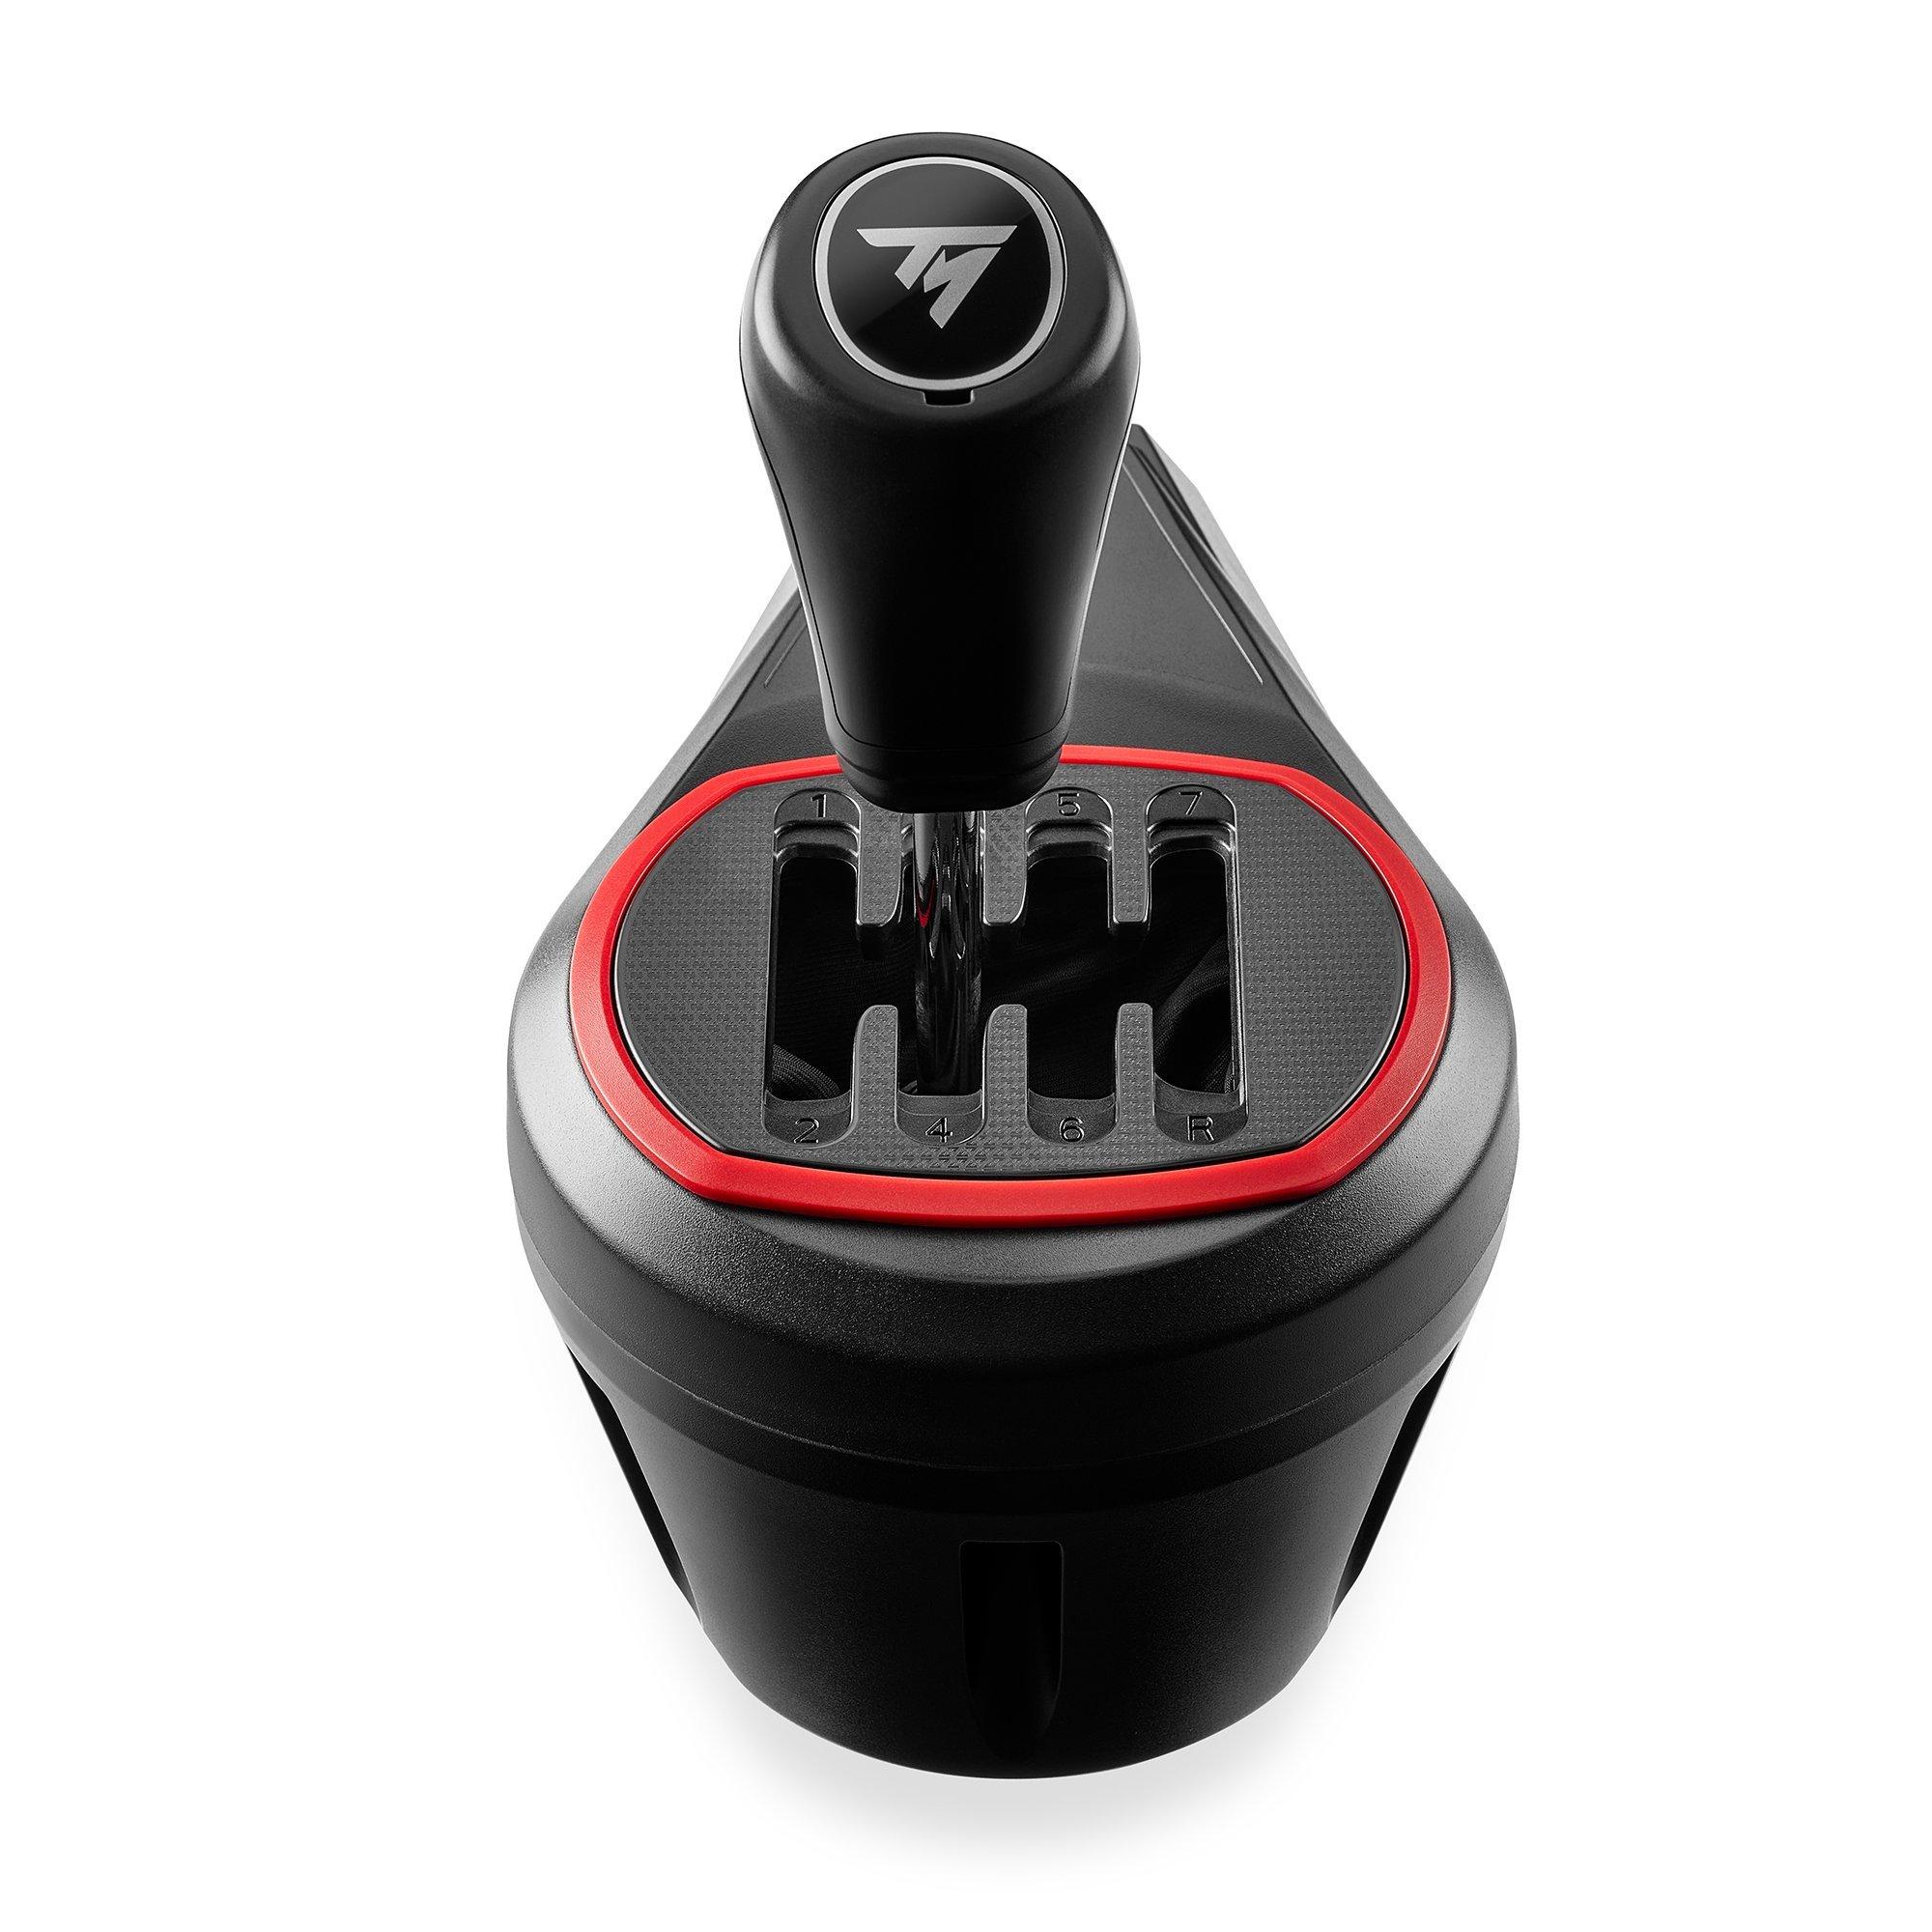 Buy Thrustmaster TH8A Shifter (PS5, PS4, Xbox Series X/S, One, PC